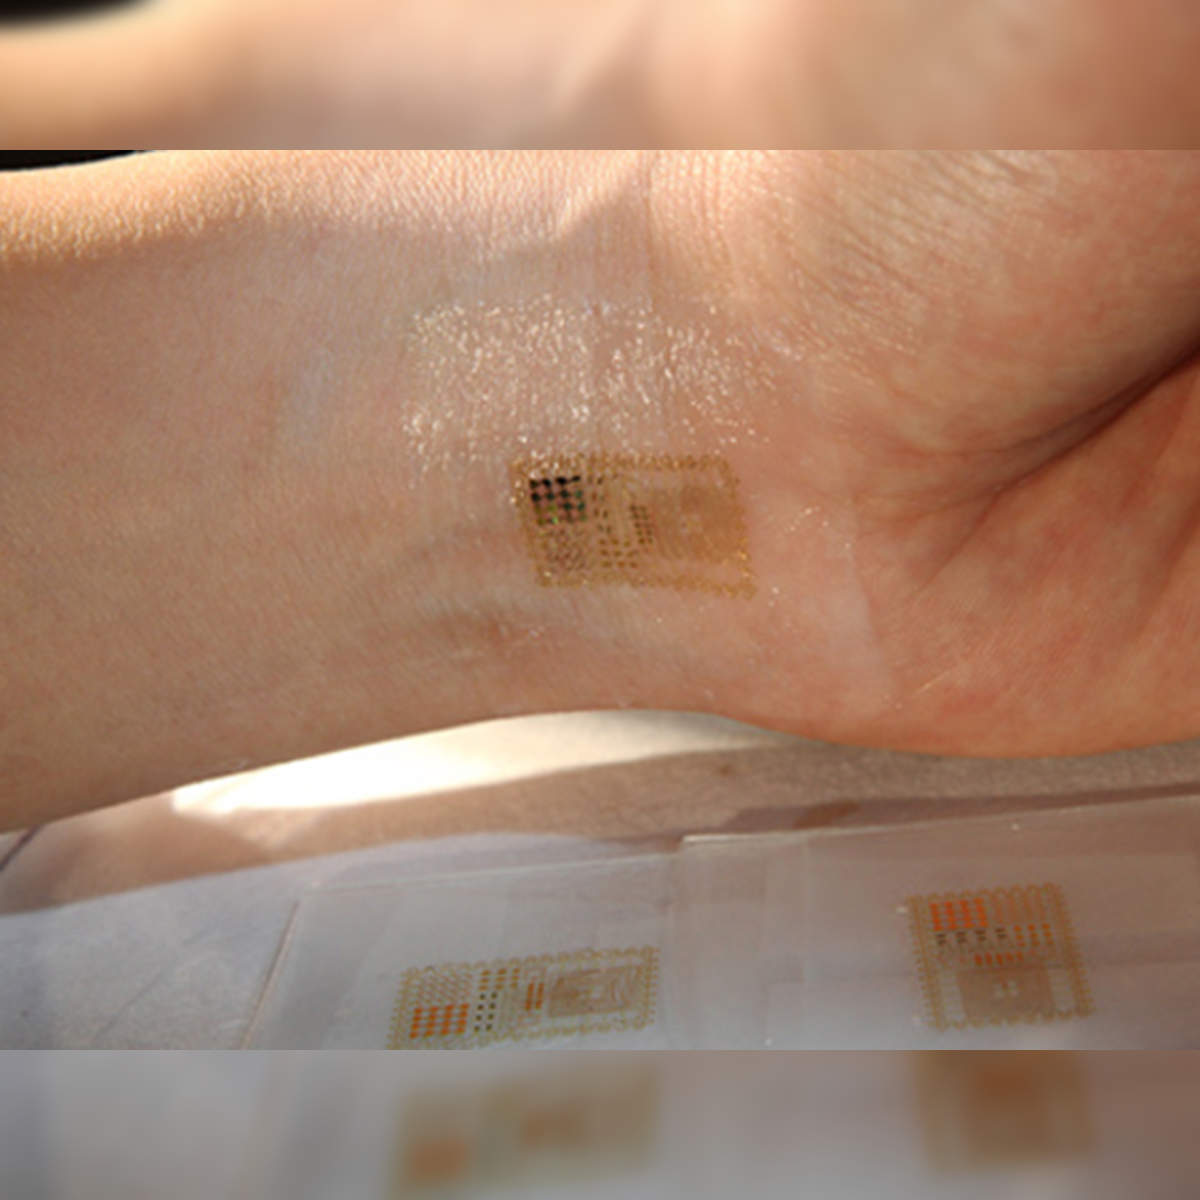 Graphene electronic-tattoo monitors blood pressure over time